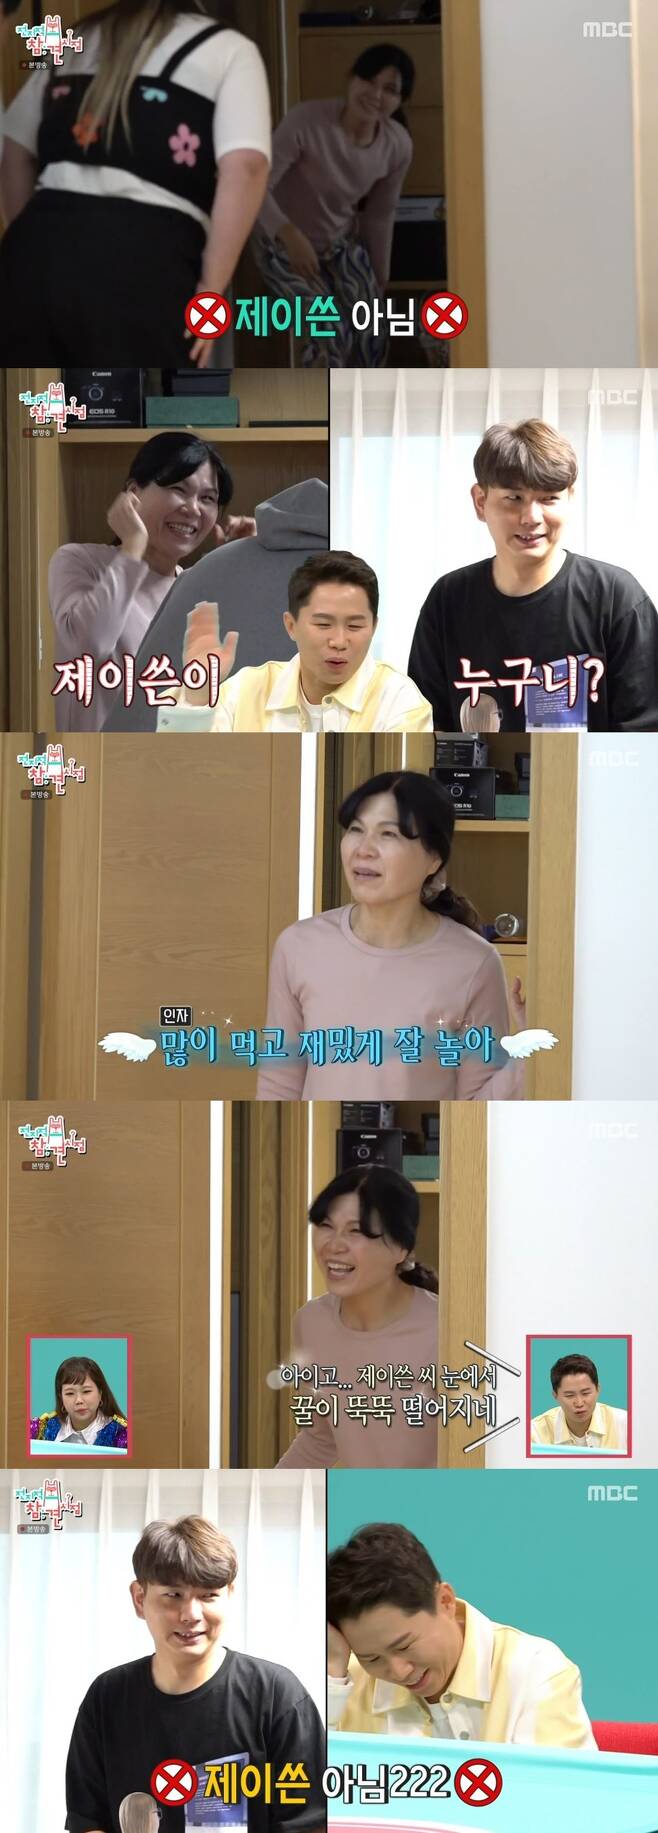 Lee Guk-joo has found a new home for Hong Hyun-hee.On November 26, MBC  ⁇ Point Point of Omniscient Interfere  (hereinafter referred to as Point of Omniscient Interfere) appeared as a guest of gag woman Lee Guk-joo.On this day, Lee Guk-joo went to the fish market and bought seafood directly to give delicious food to Hong Hyun-hee who gave birth to a child.However, Lee Guk-joo laughed at the sight of the market, ordering conger eel, red pepper, squid, lobster, and crab tempura.After finishing the eating show, Lee Guk-joo showed off his big hands, including oysters, squid, gaebul, and seasonal defense. It was the moment when expectations for a prize for Hong Hyun-hee grew.Lee Guk-joo, who found a new house in Hong Hyun-hee, admired the wider landscape than the house where Jason and Hong Hyun-hee lived.Hong Hyun-hees house, which had a clean interior, was filled with baby goods.Thanks to her mother-in-laws help, Hong Hyun-hee became a free lady and had a good time with Lee Guk-joo, who made the Visualo studio MCs who looked just like Jason smile.MCs did not recognize her mother-in-law as Jason, and she said, Its a mental collapse.